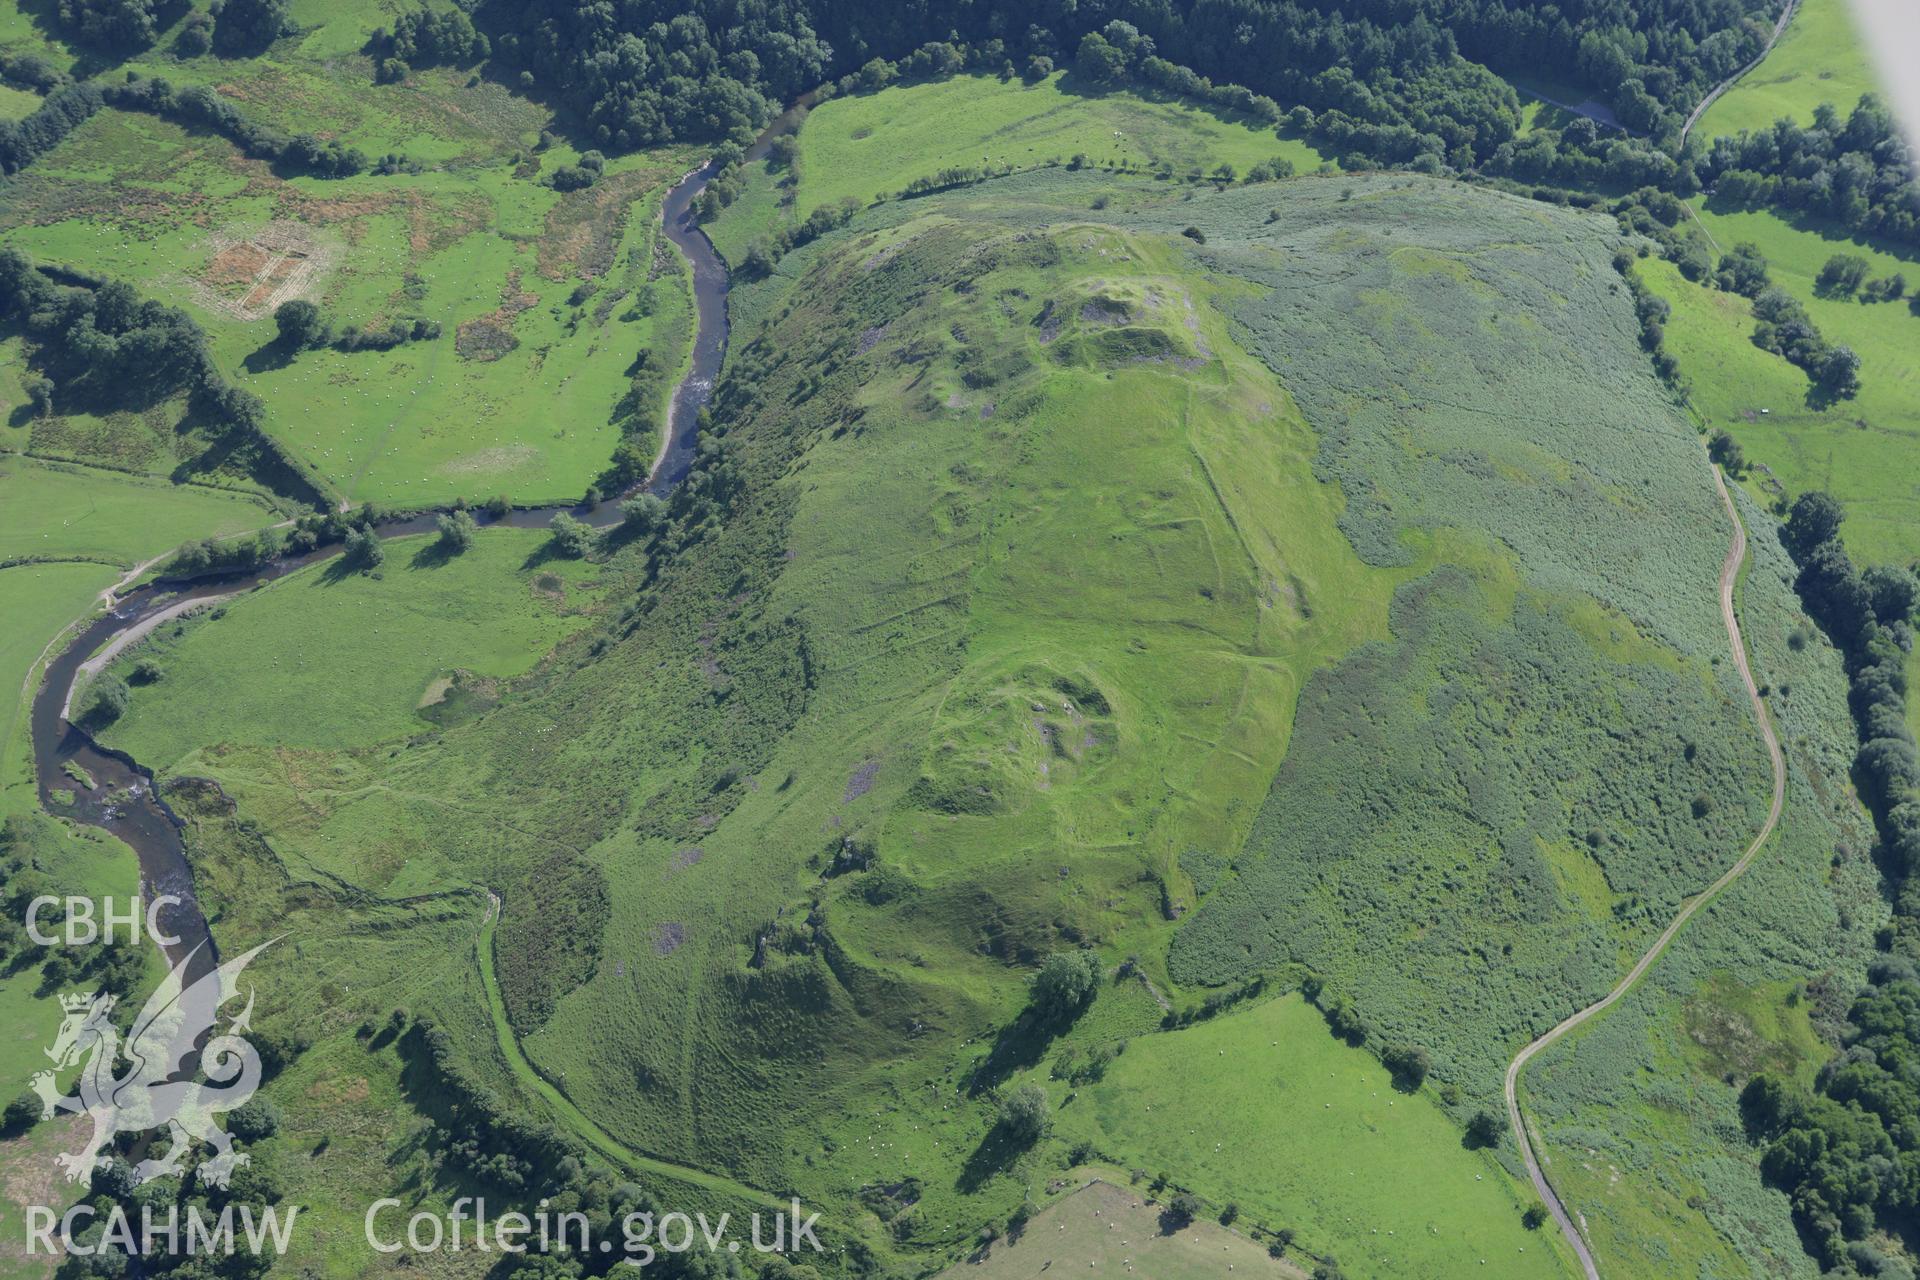 RCAHMW colour oblique aerial photograph of Cefnllys Castle. Taken on 08 August 2007 by Toby Driver